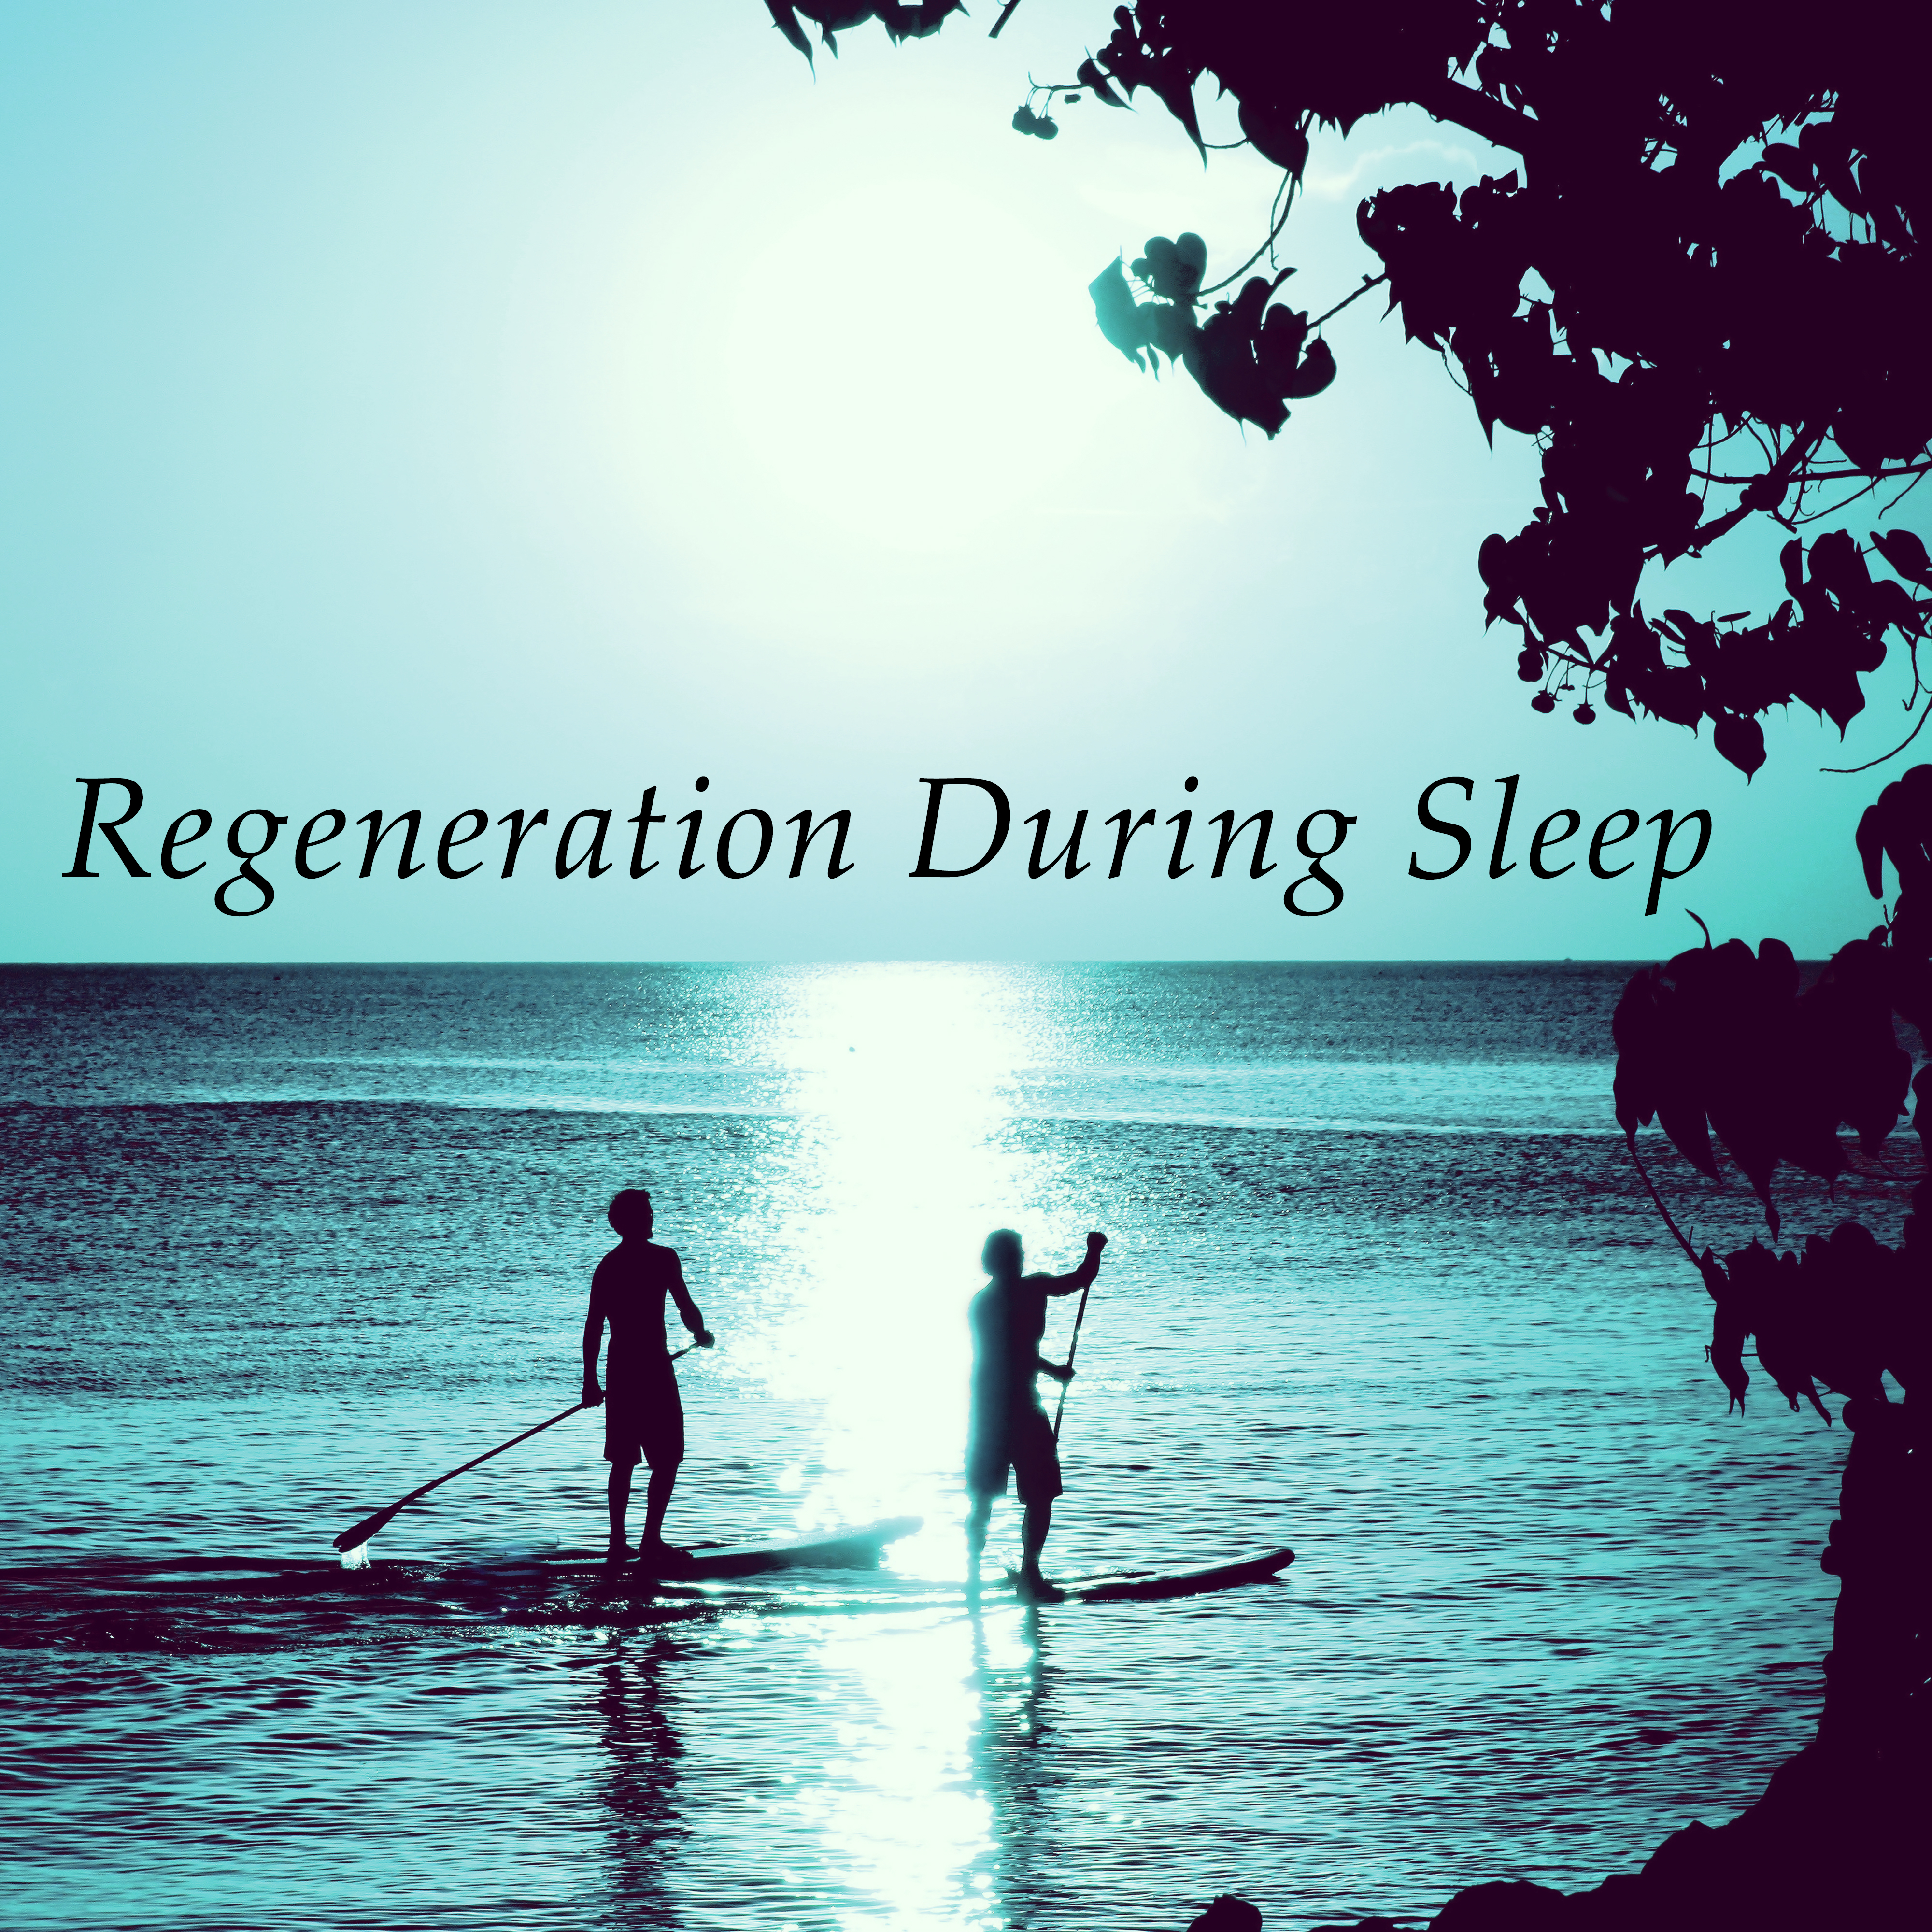 Regeneration During Sleep - Relaxing Background Music for Stress Relief, Gentle Music for Restful Sleep, Calming Therapy Music with Nature Sounds, Mind and Body Harmony